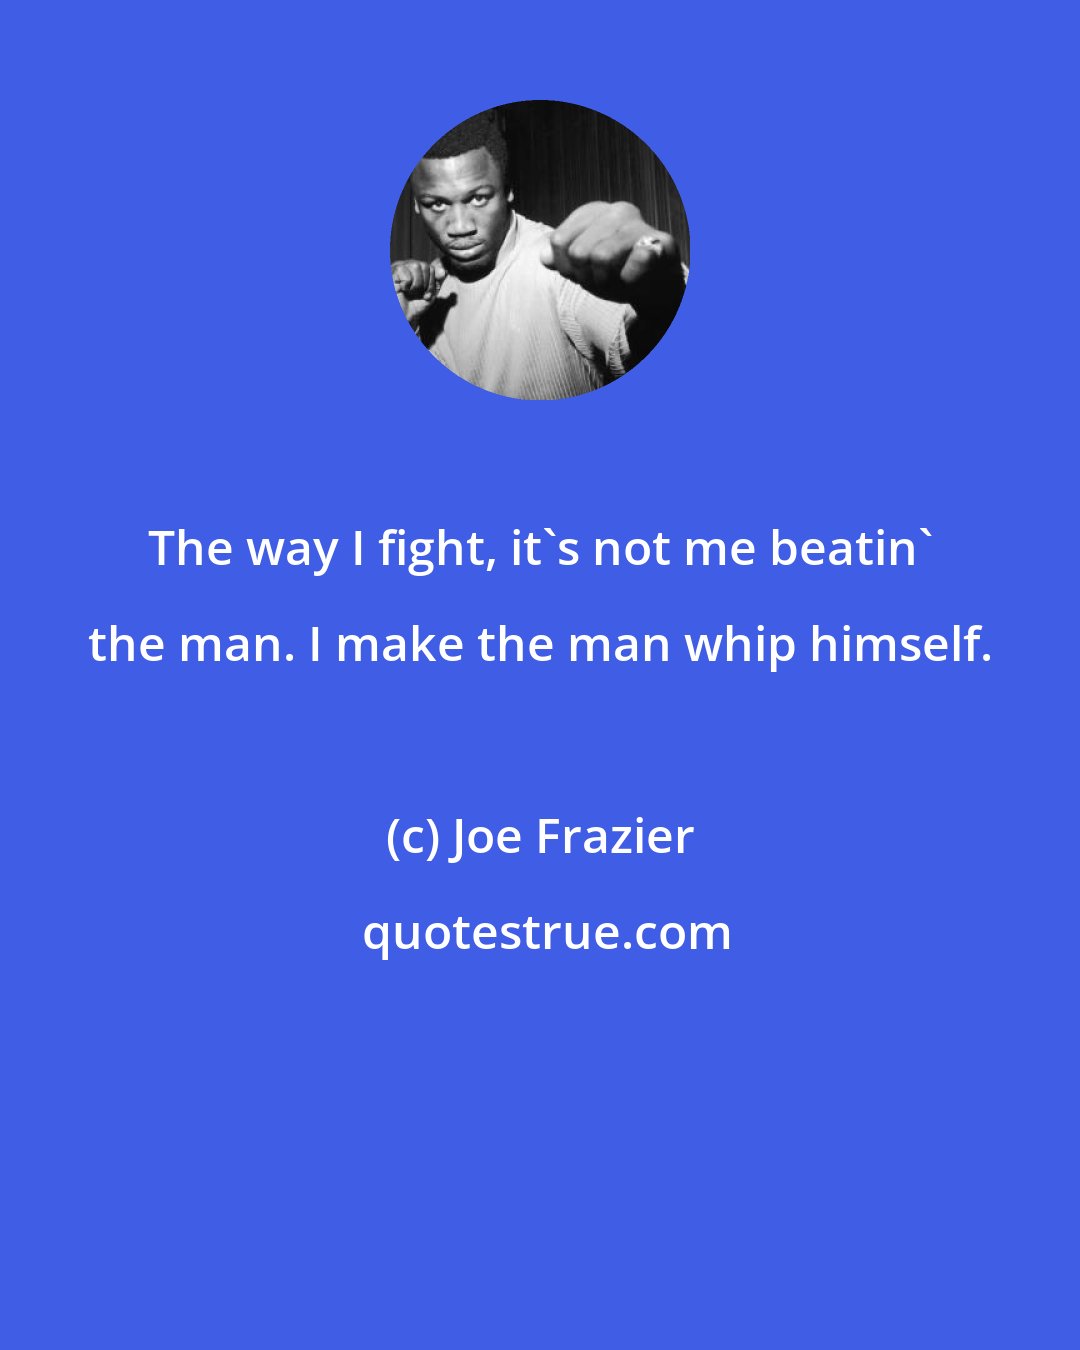 Joe Frazier: The way I fight, it's not me beatin' the man. I make the man whip himself.